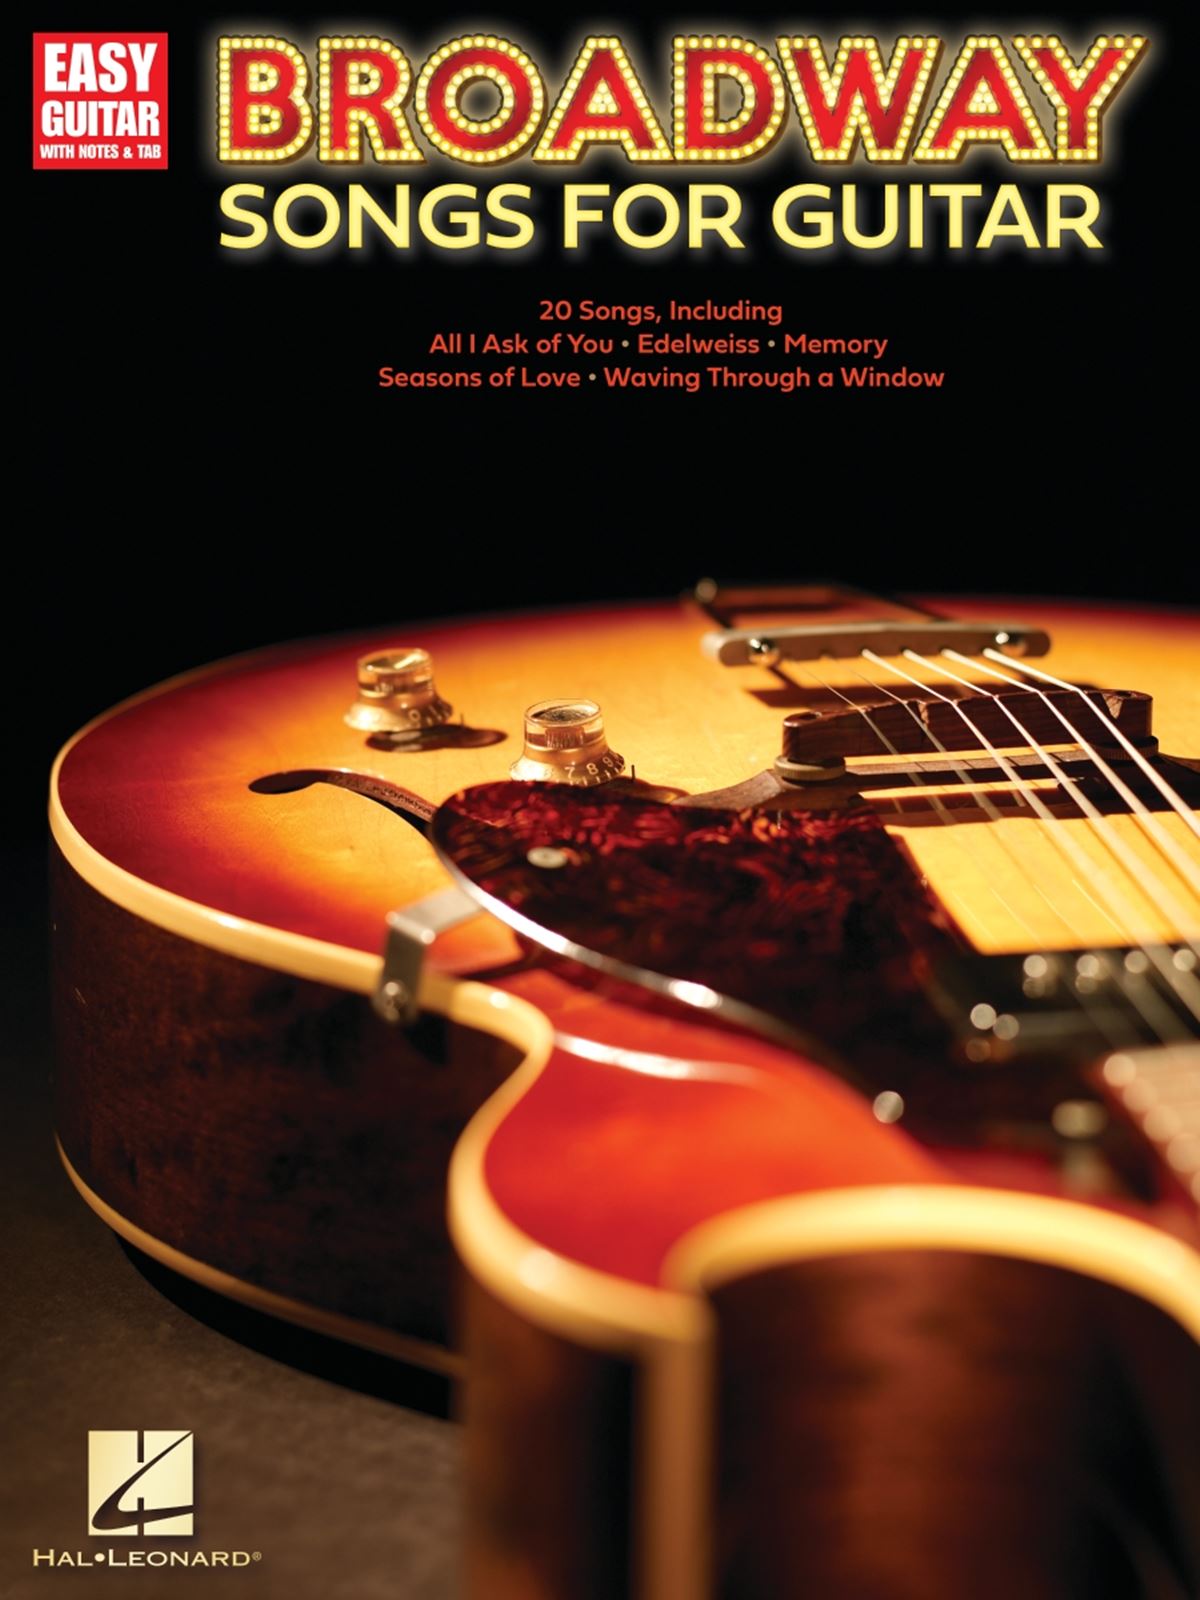 Broadway Songs For Guitar